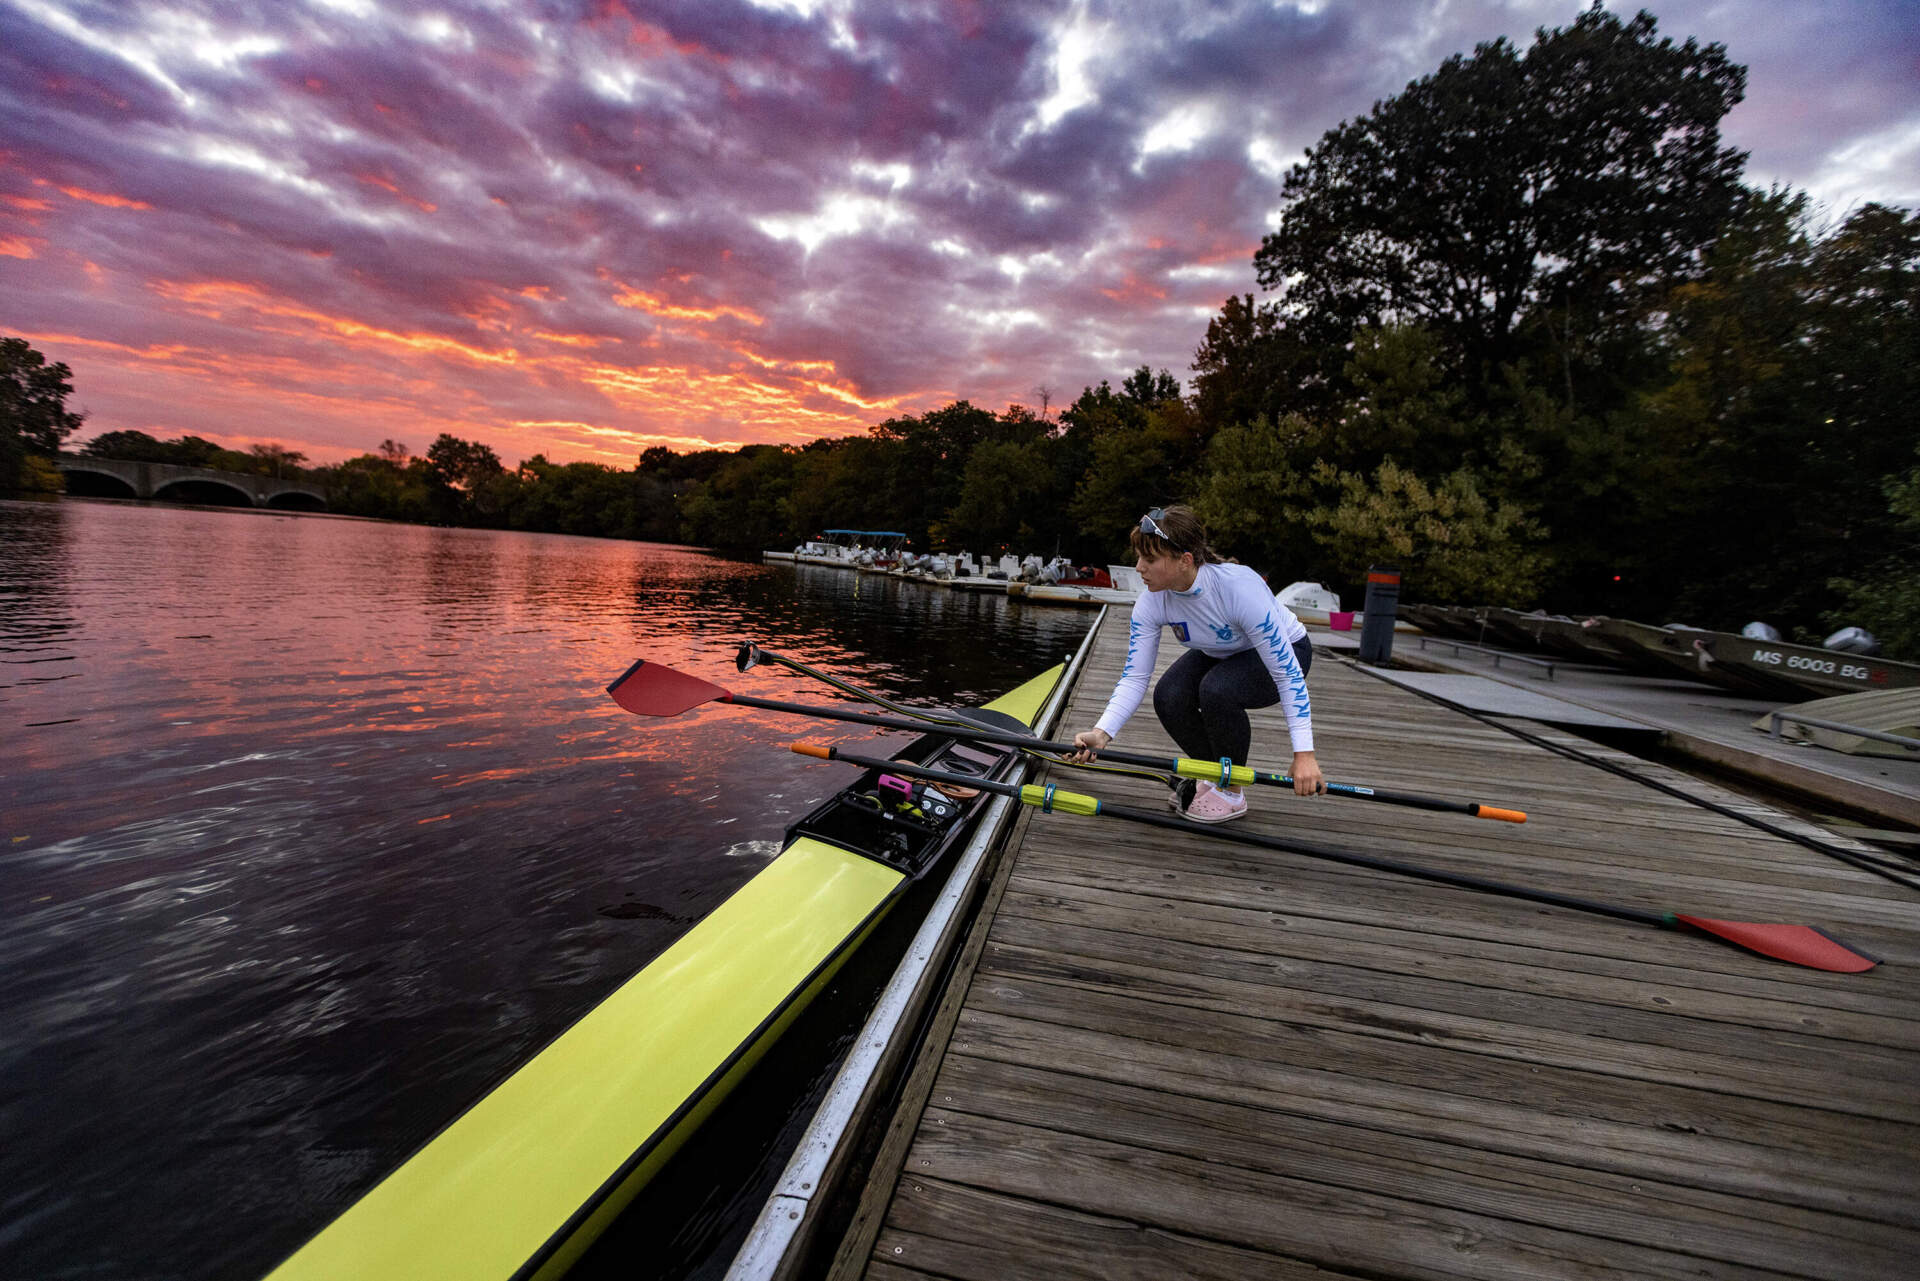 Rower Maria Prodan sets out onto the Charles River to practice for the Head of the Charles. (Jesse Costa/WBUR)